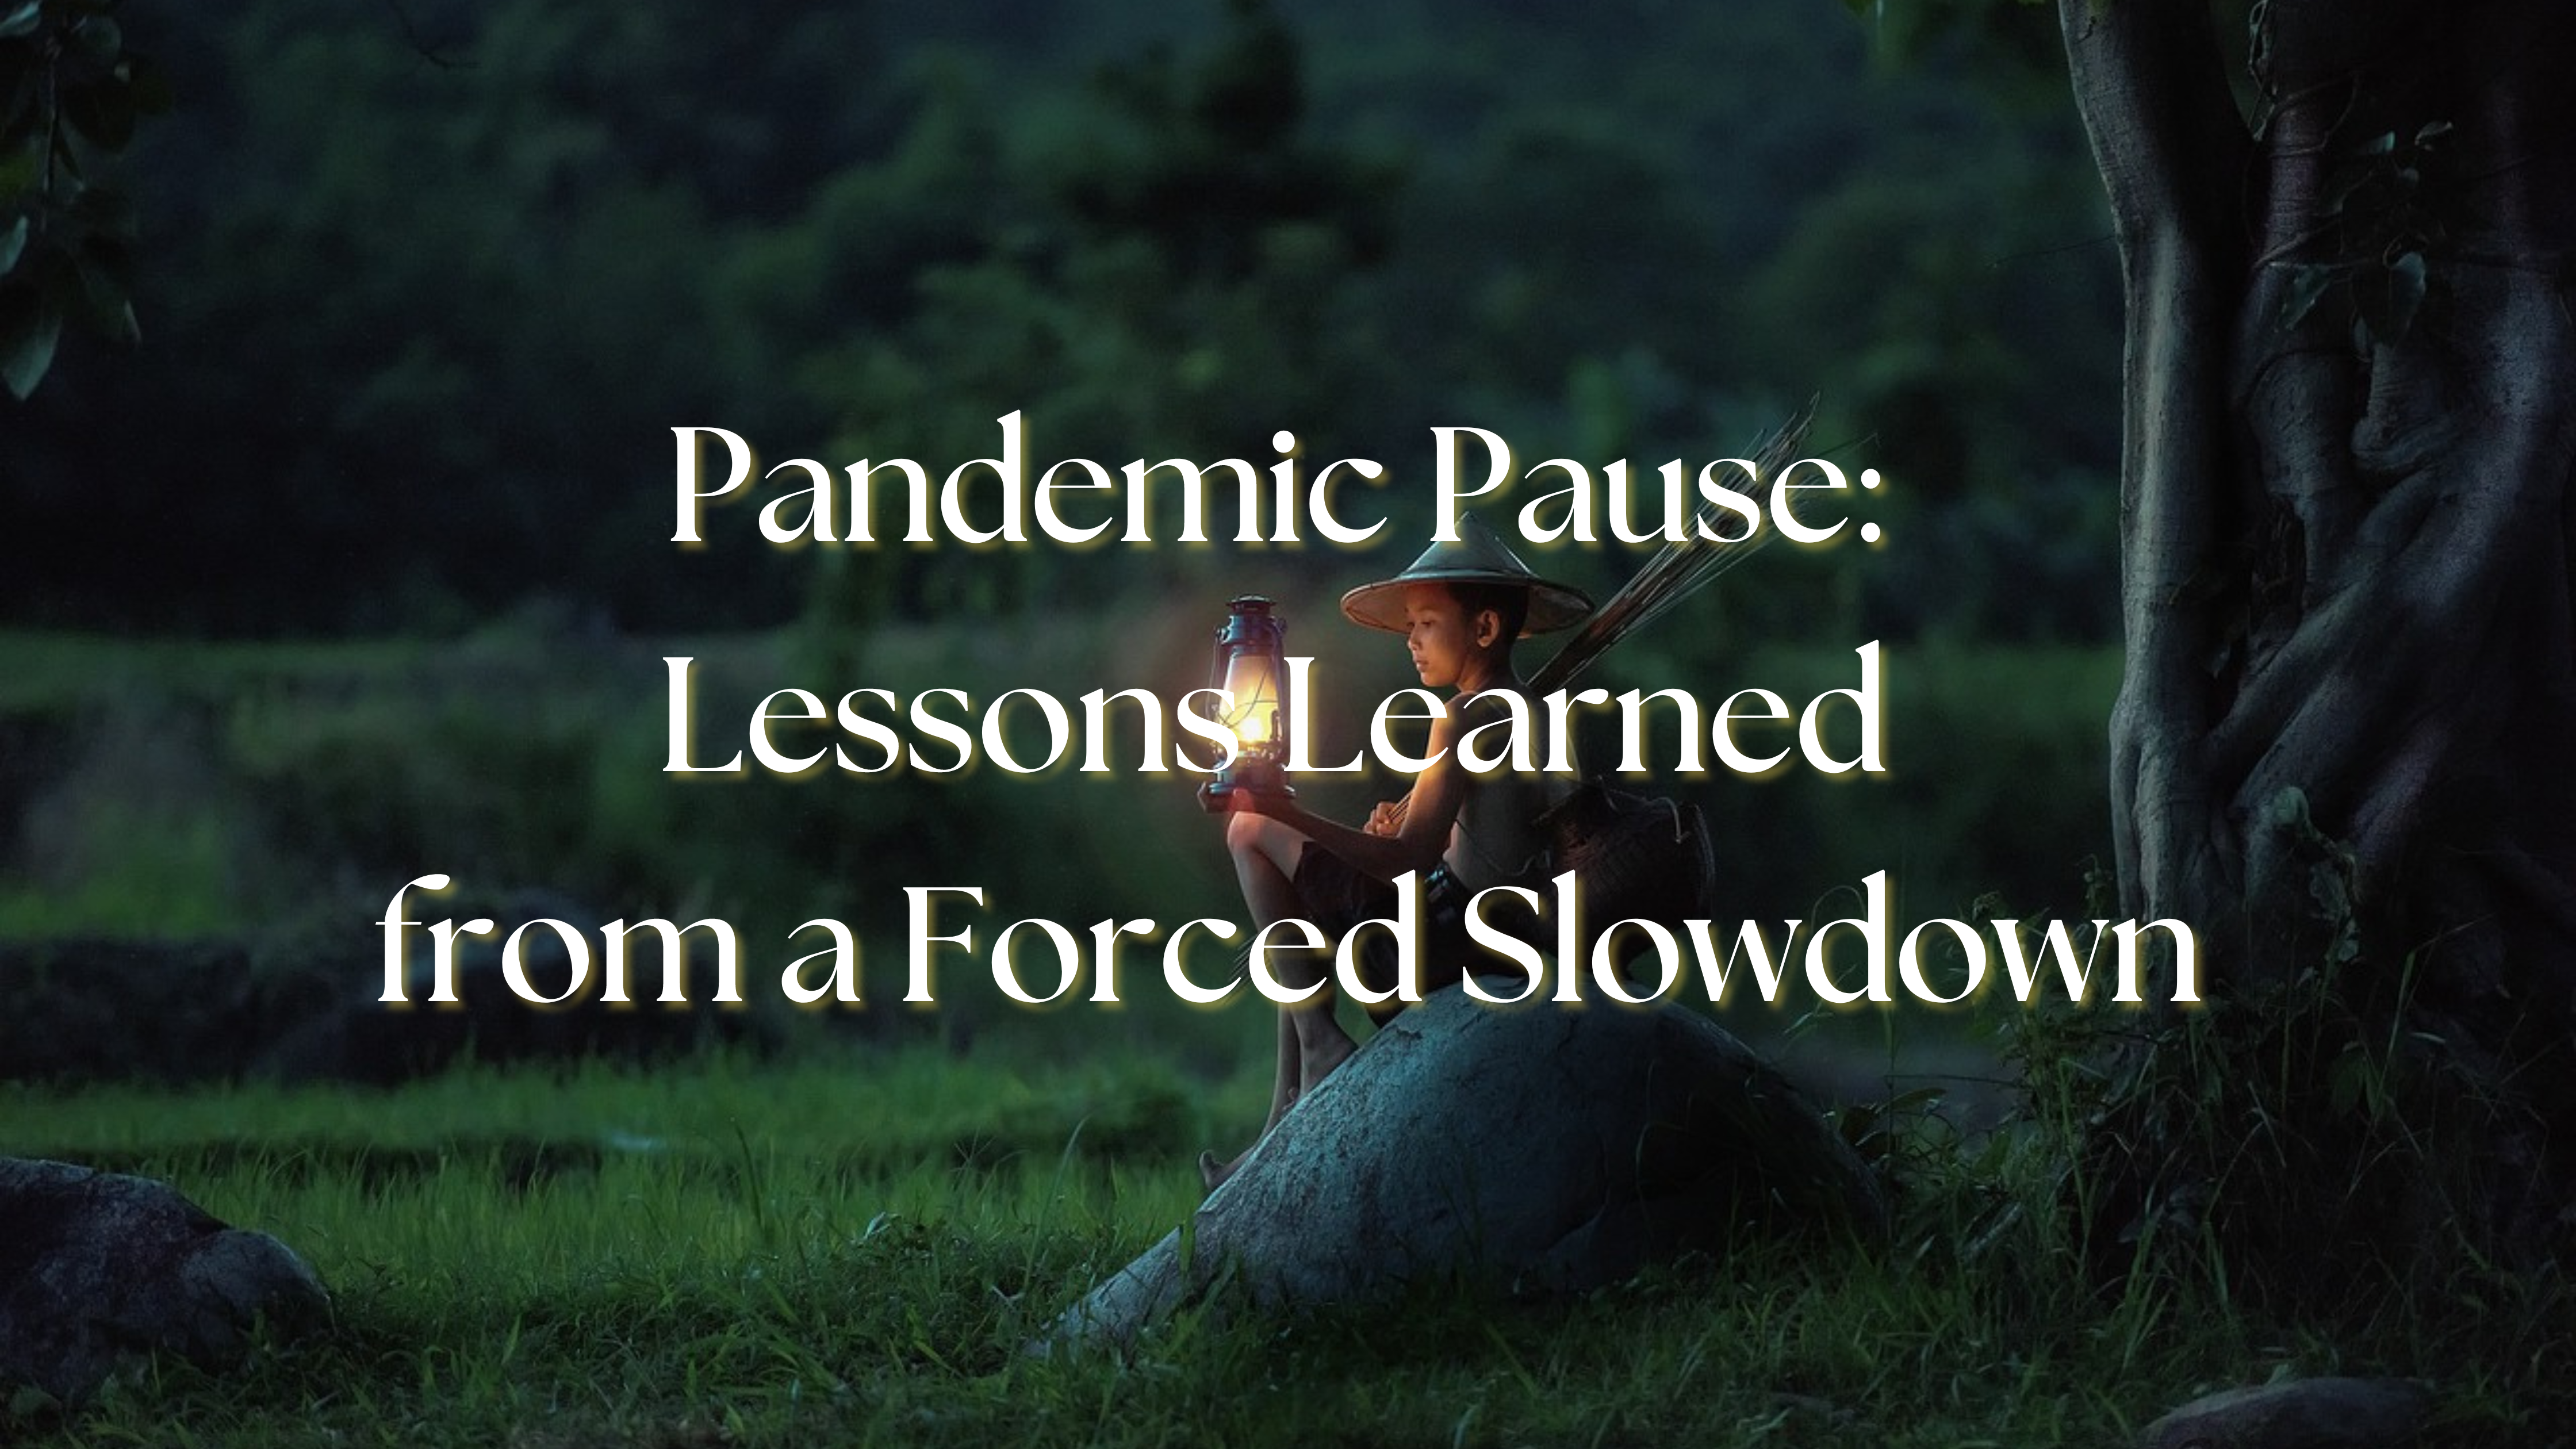 You are currently viewing Pandemic Pause: Lessons Learned from a Forced Slowdown